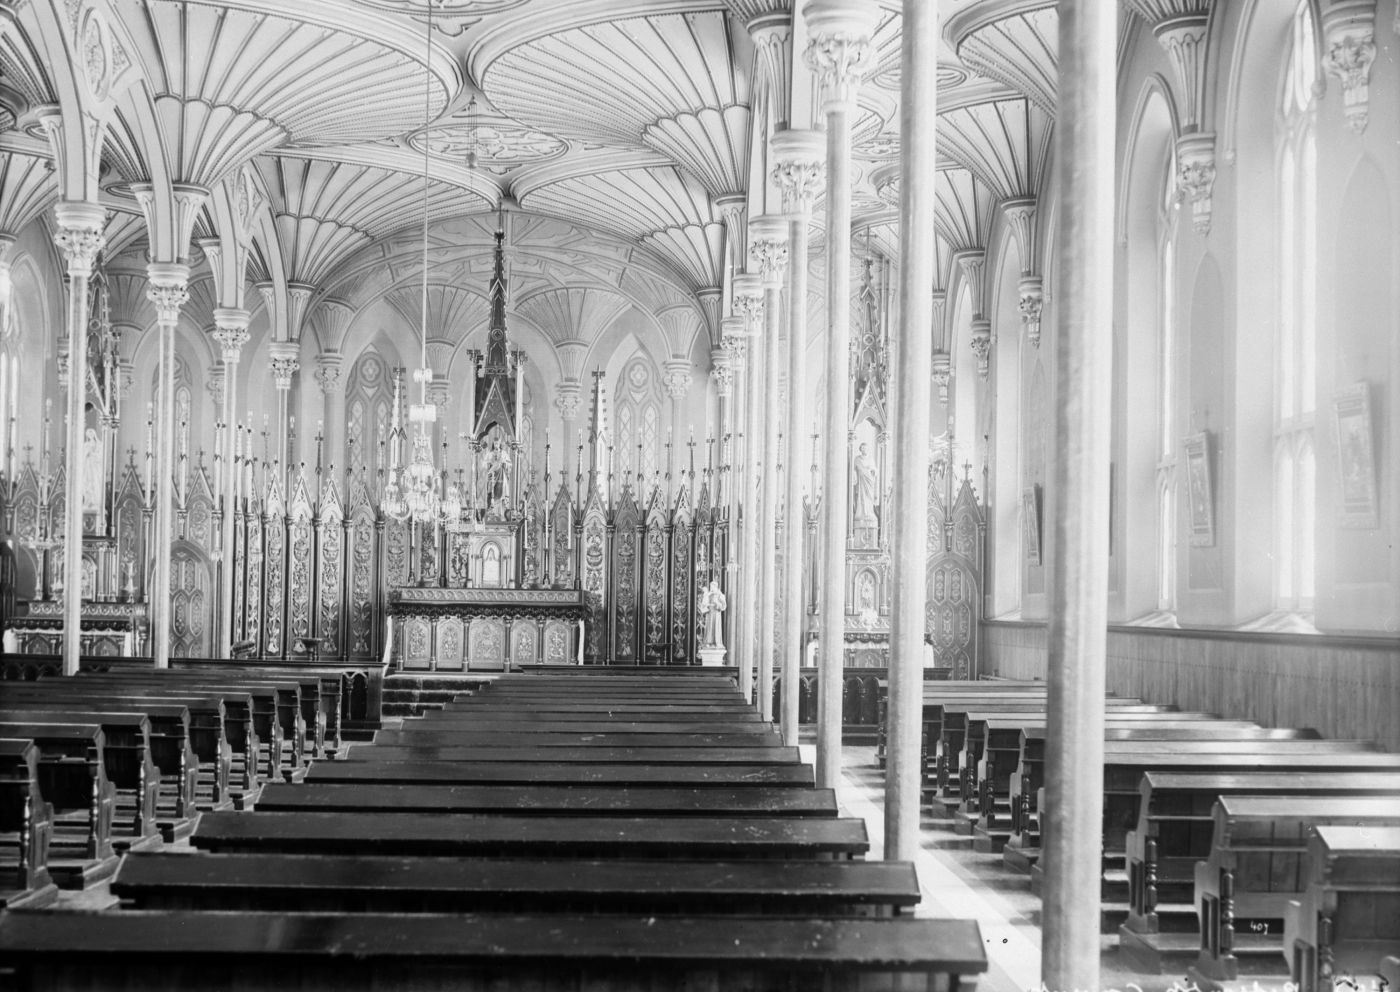 Black and white photograph of the interior of a small church, with many benches in rows. The vaulted ceiling, made of carved wood, is supported by thin columns. The altar is very ornate.